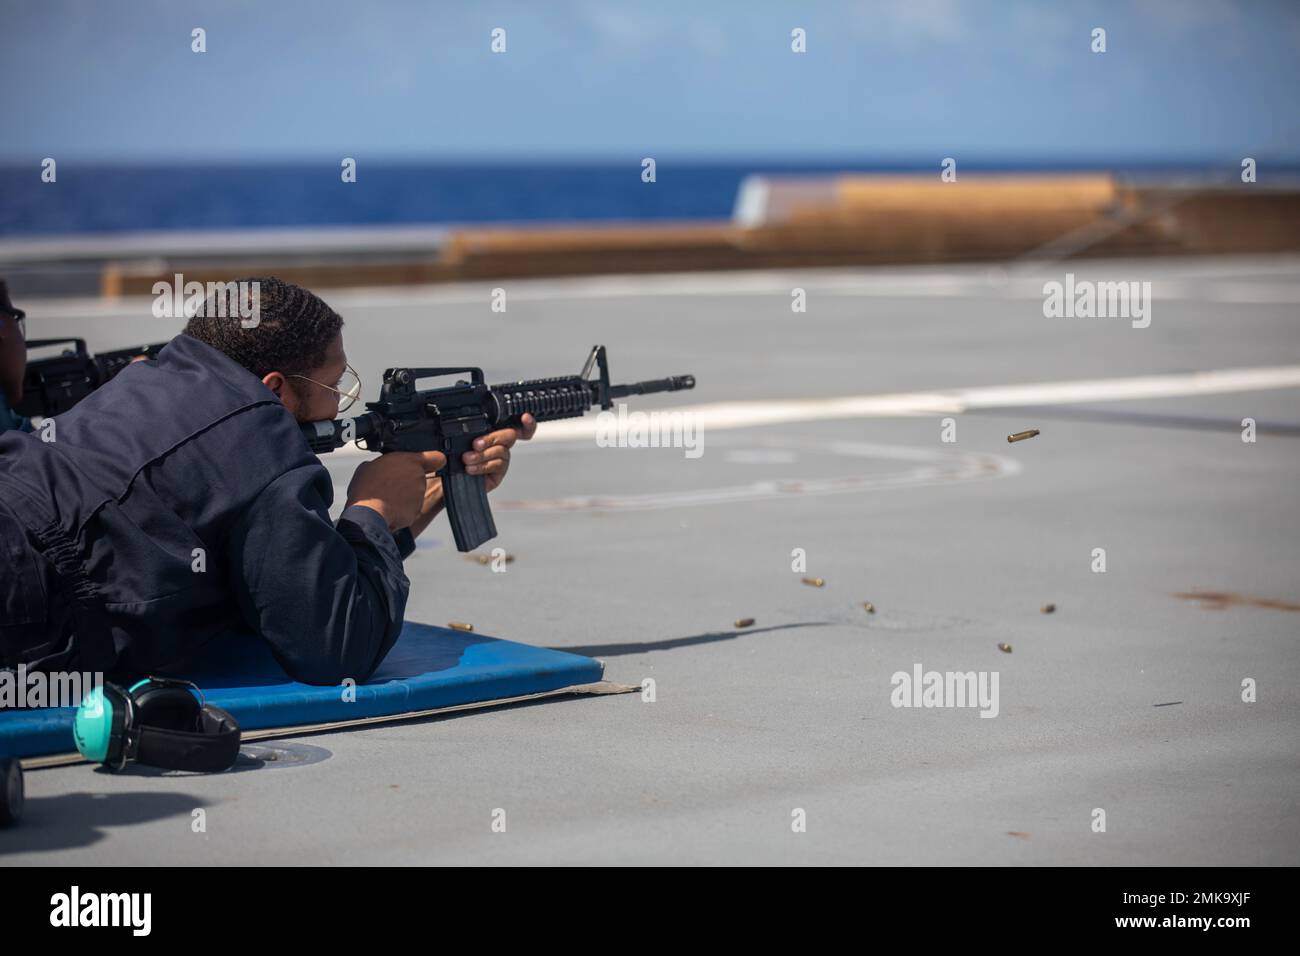 PHILIPPINE SEA (Sept. 7, 2022) – Operations Specialist 1st Class Johndell  Henderson, from Los Angeles, fires an M4 rifle during a gun shoot aboard  guided-missile destroyer USS Zumwalt (DDG 1000) in the